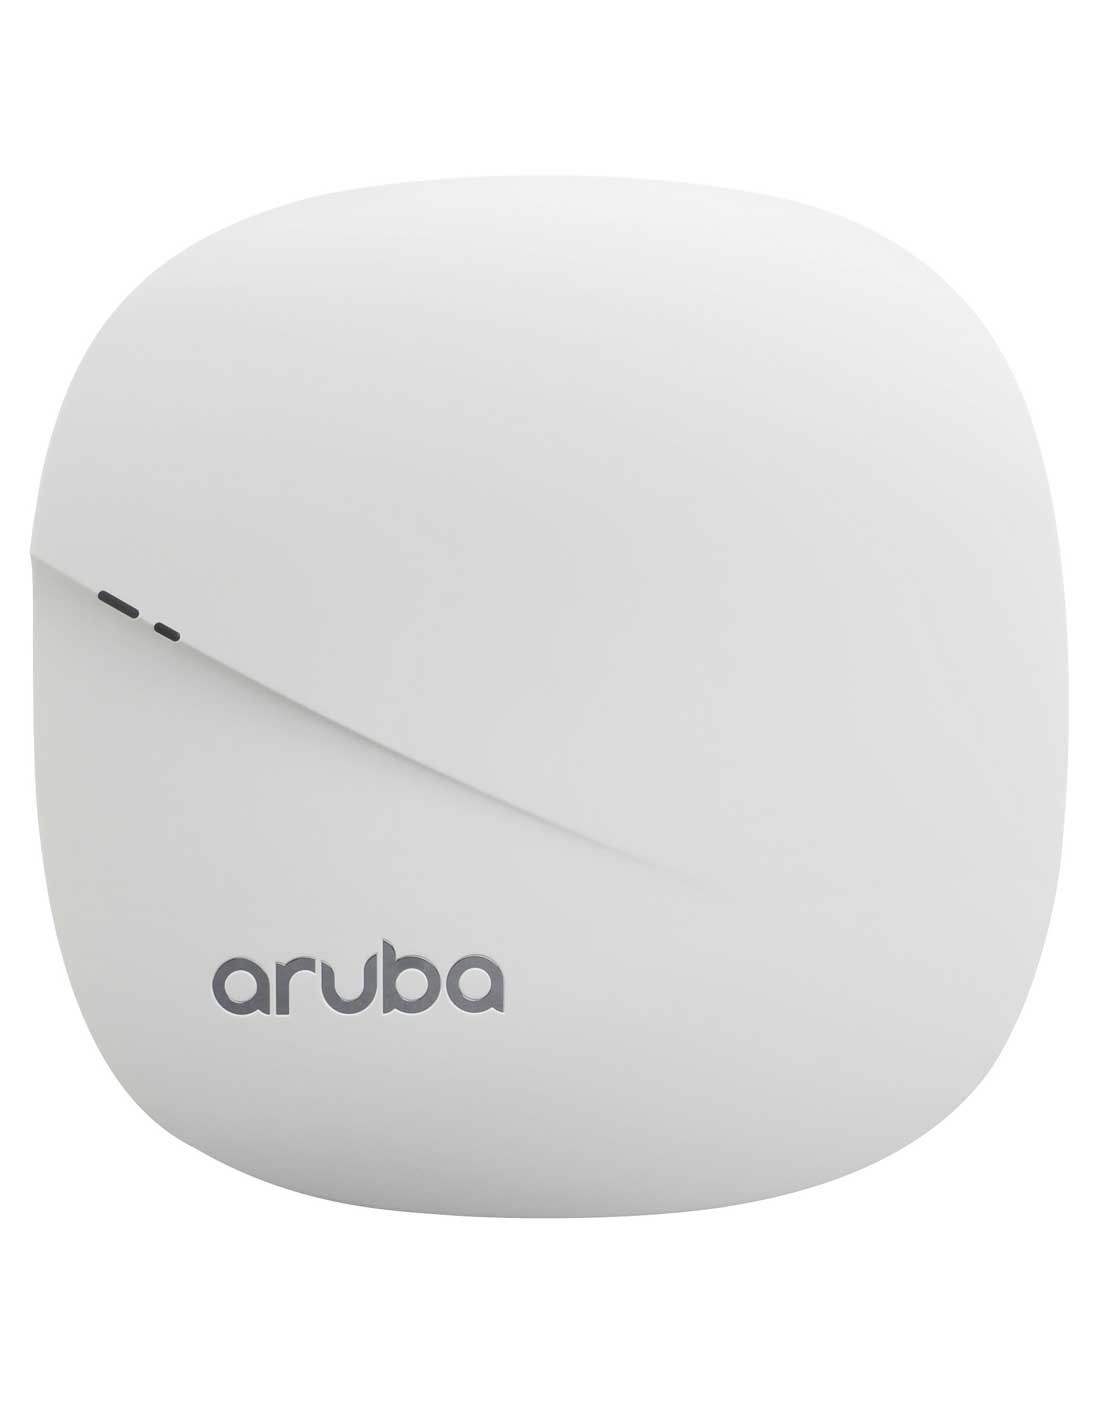 HP Aruba IAP-207 Wireless Access Point (JX954A) at a cheap price and free delivery in Dubai